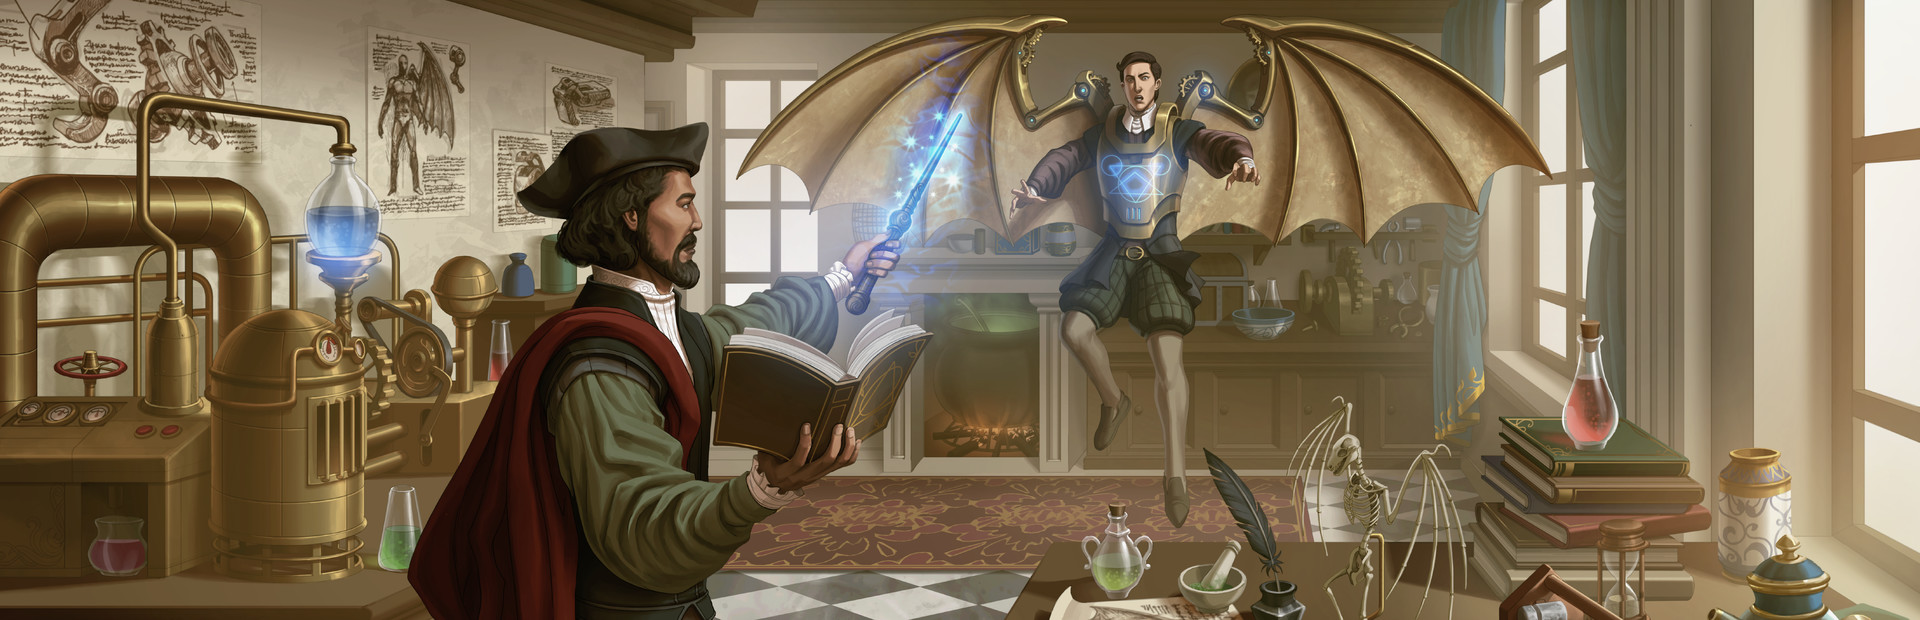 The Magician's Workshop cover image